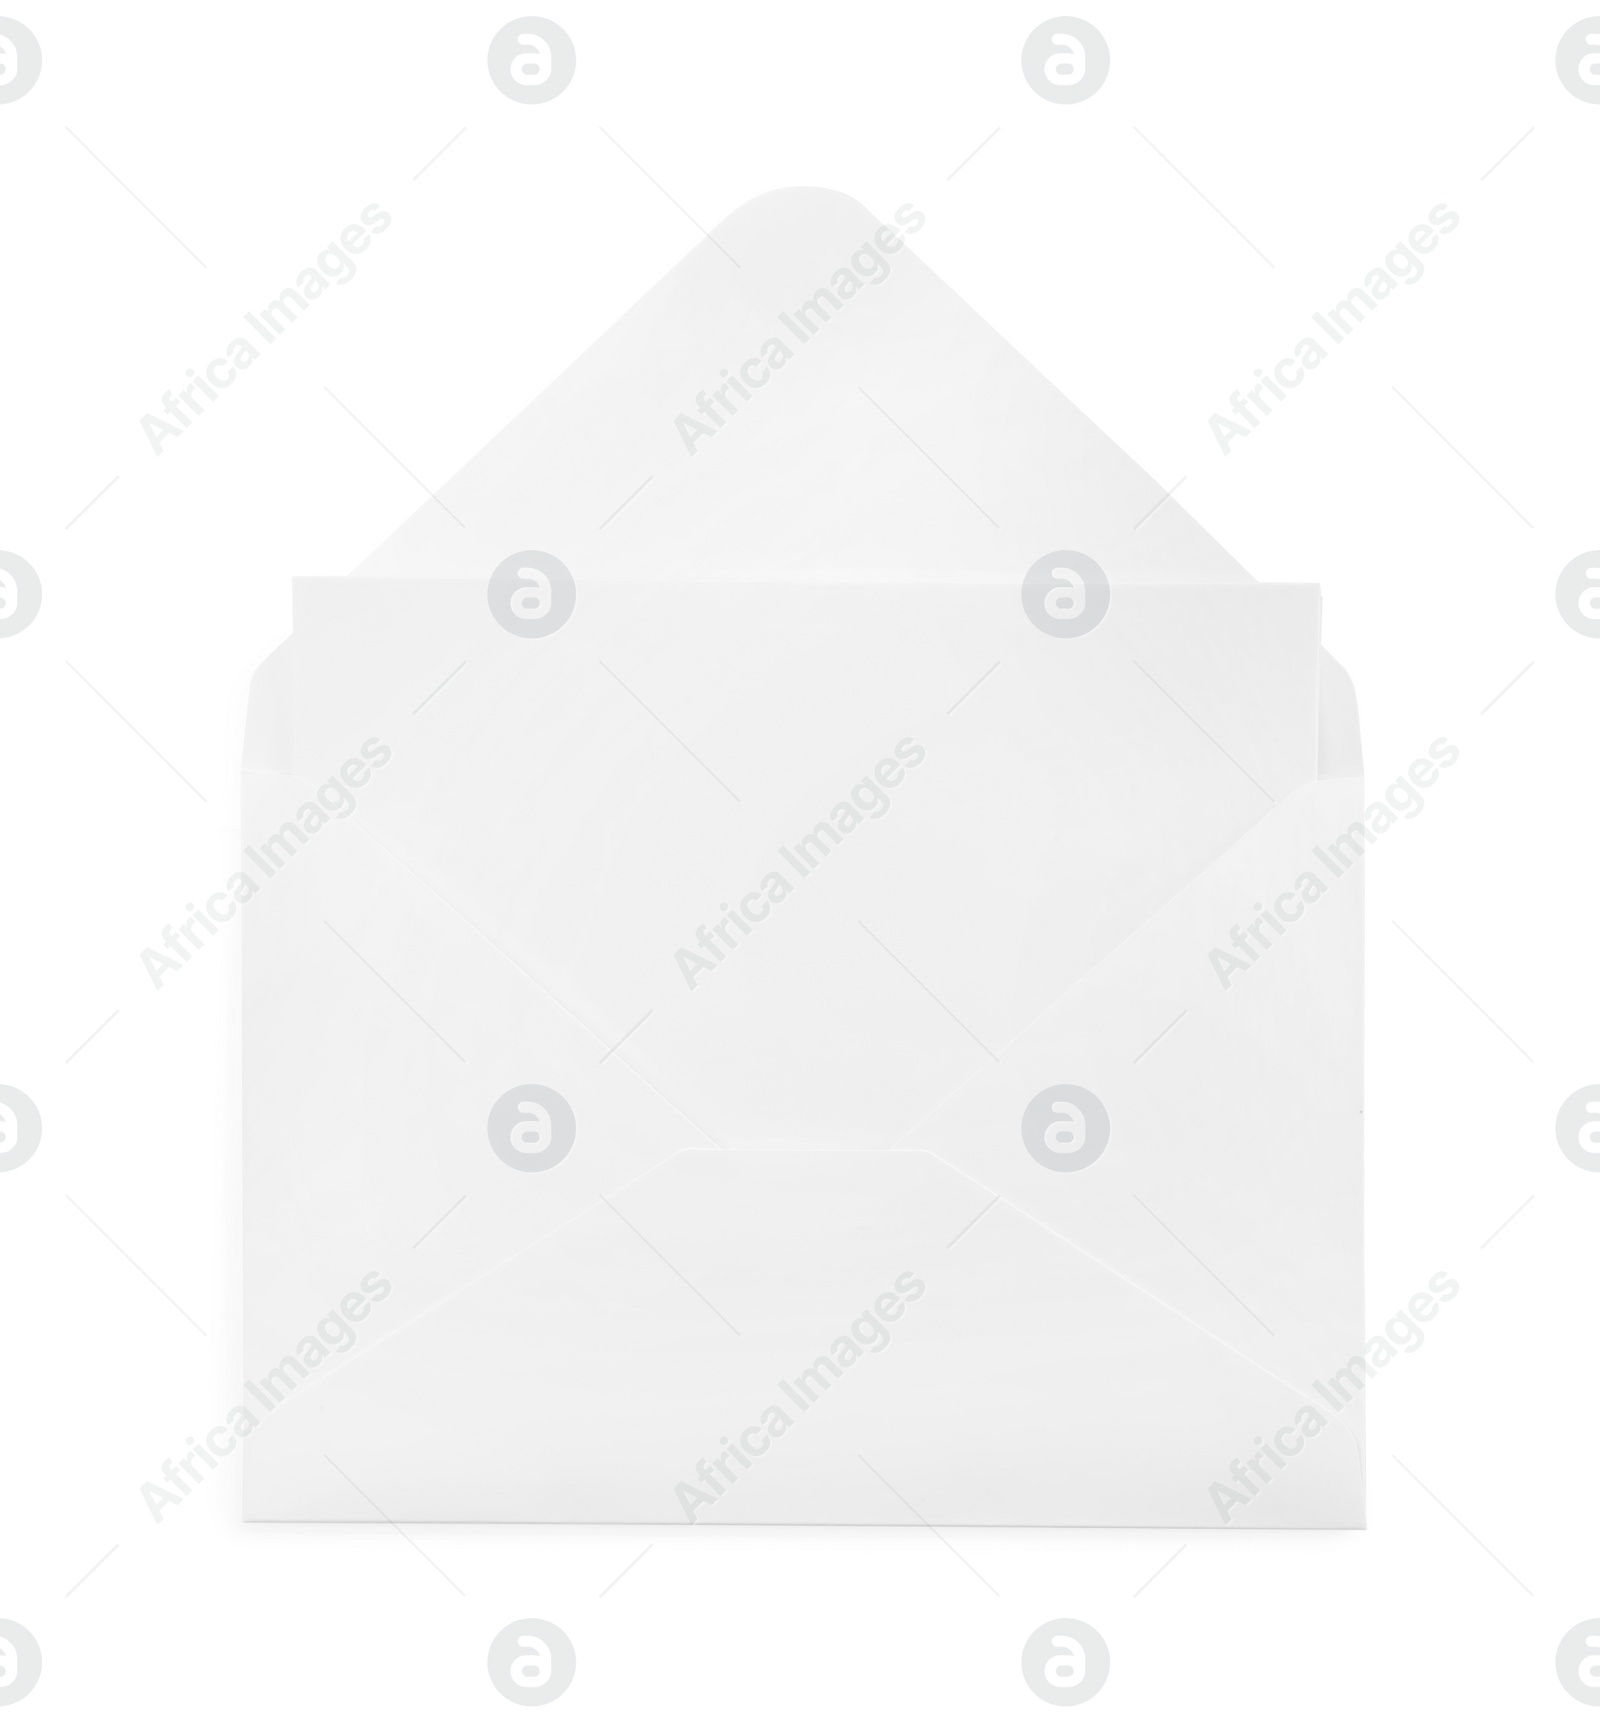 Photo of Simple paper envelope with blank card isolated on white